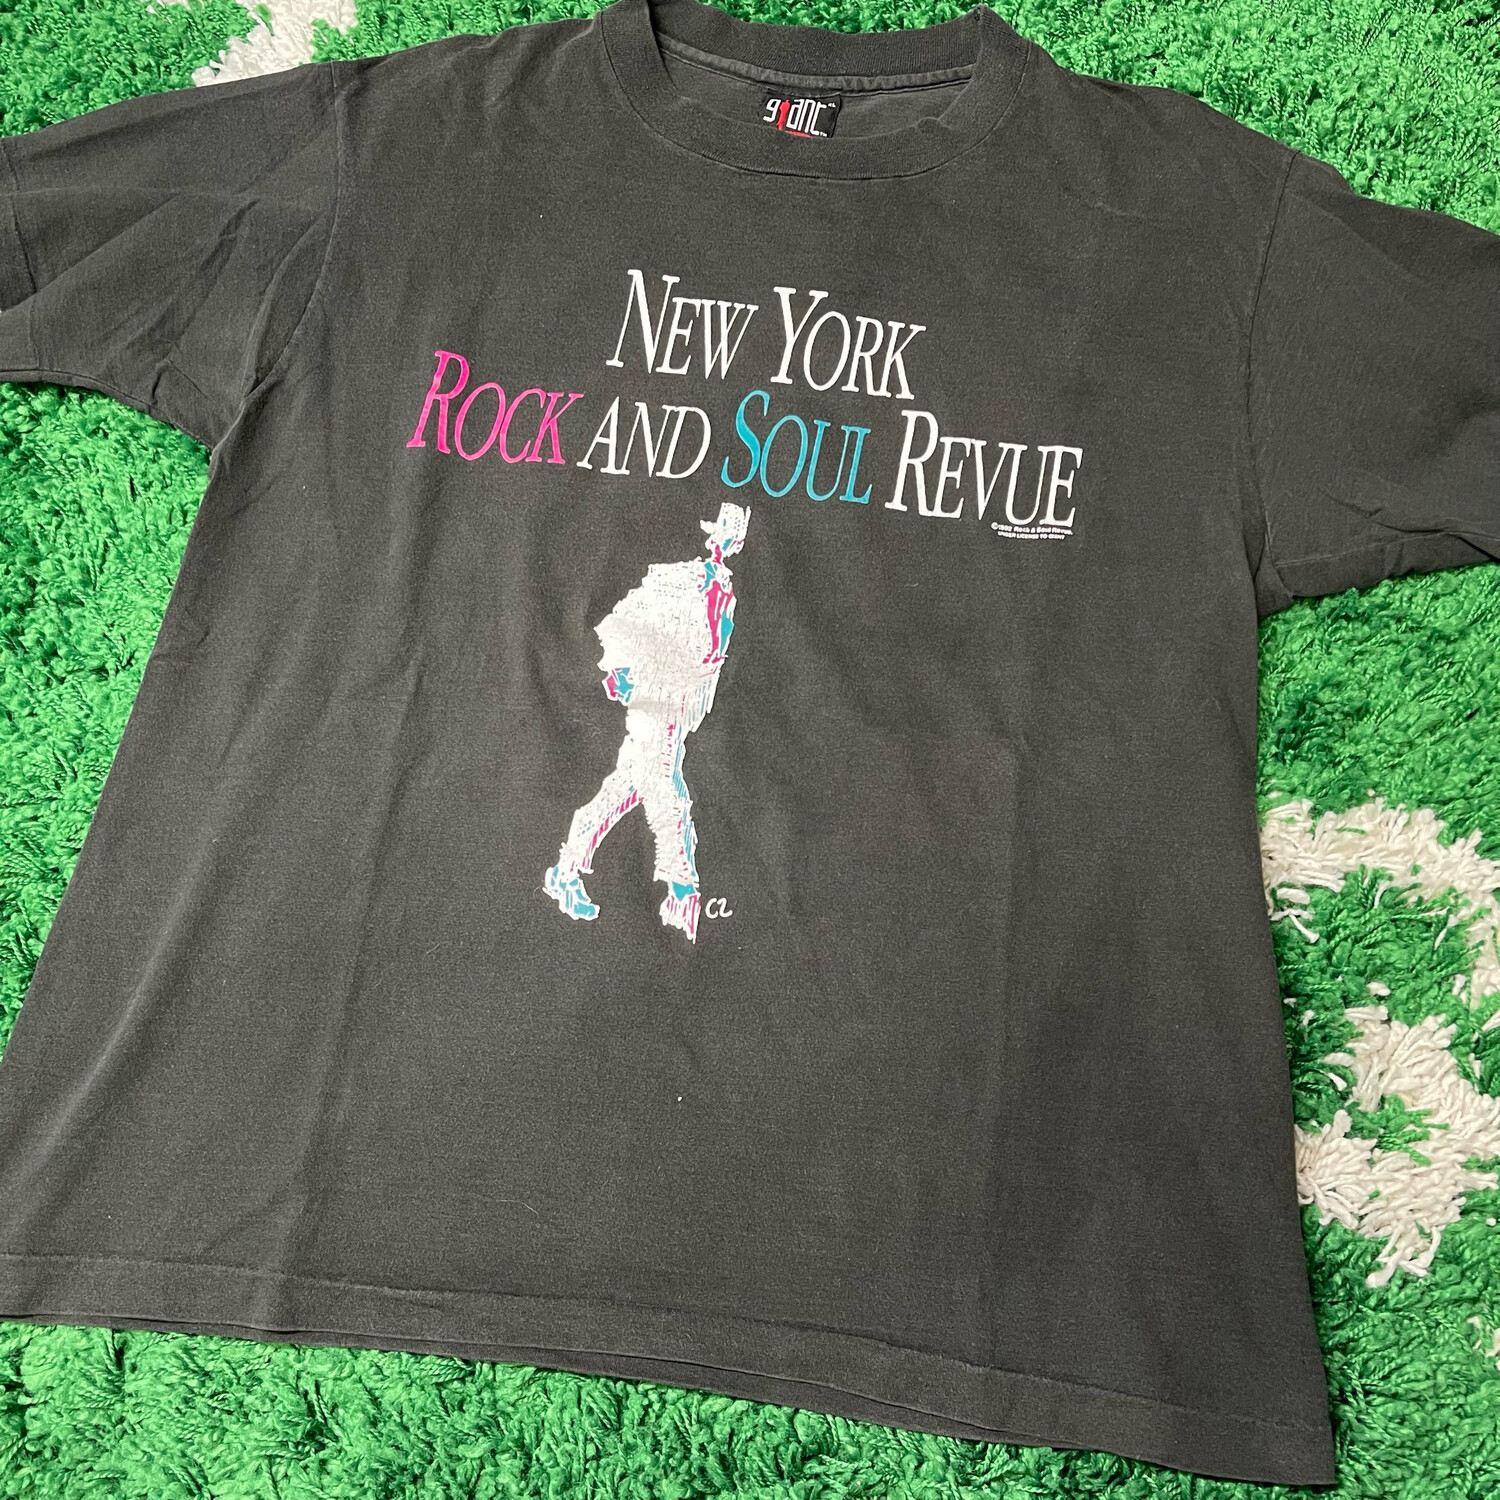 New York Rock And Soul Revue Tee Size XL